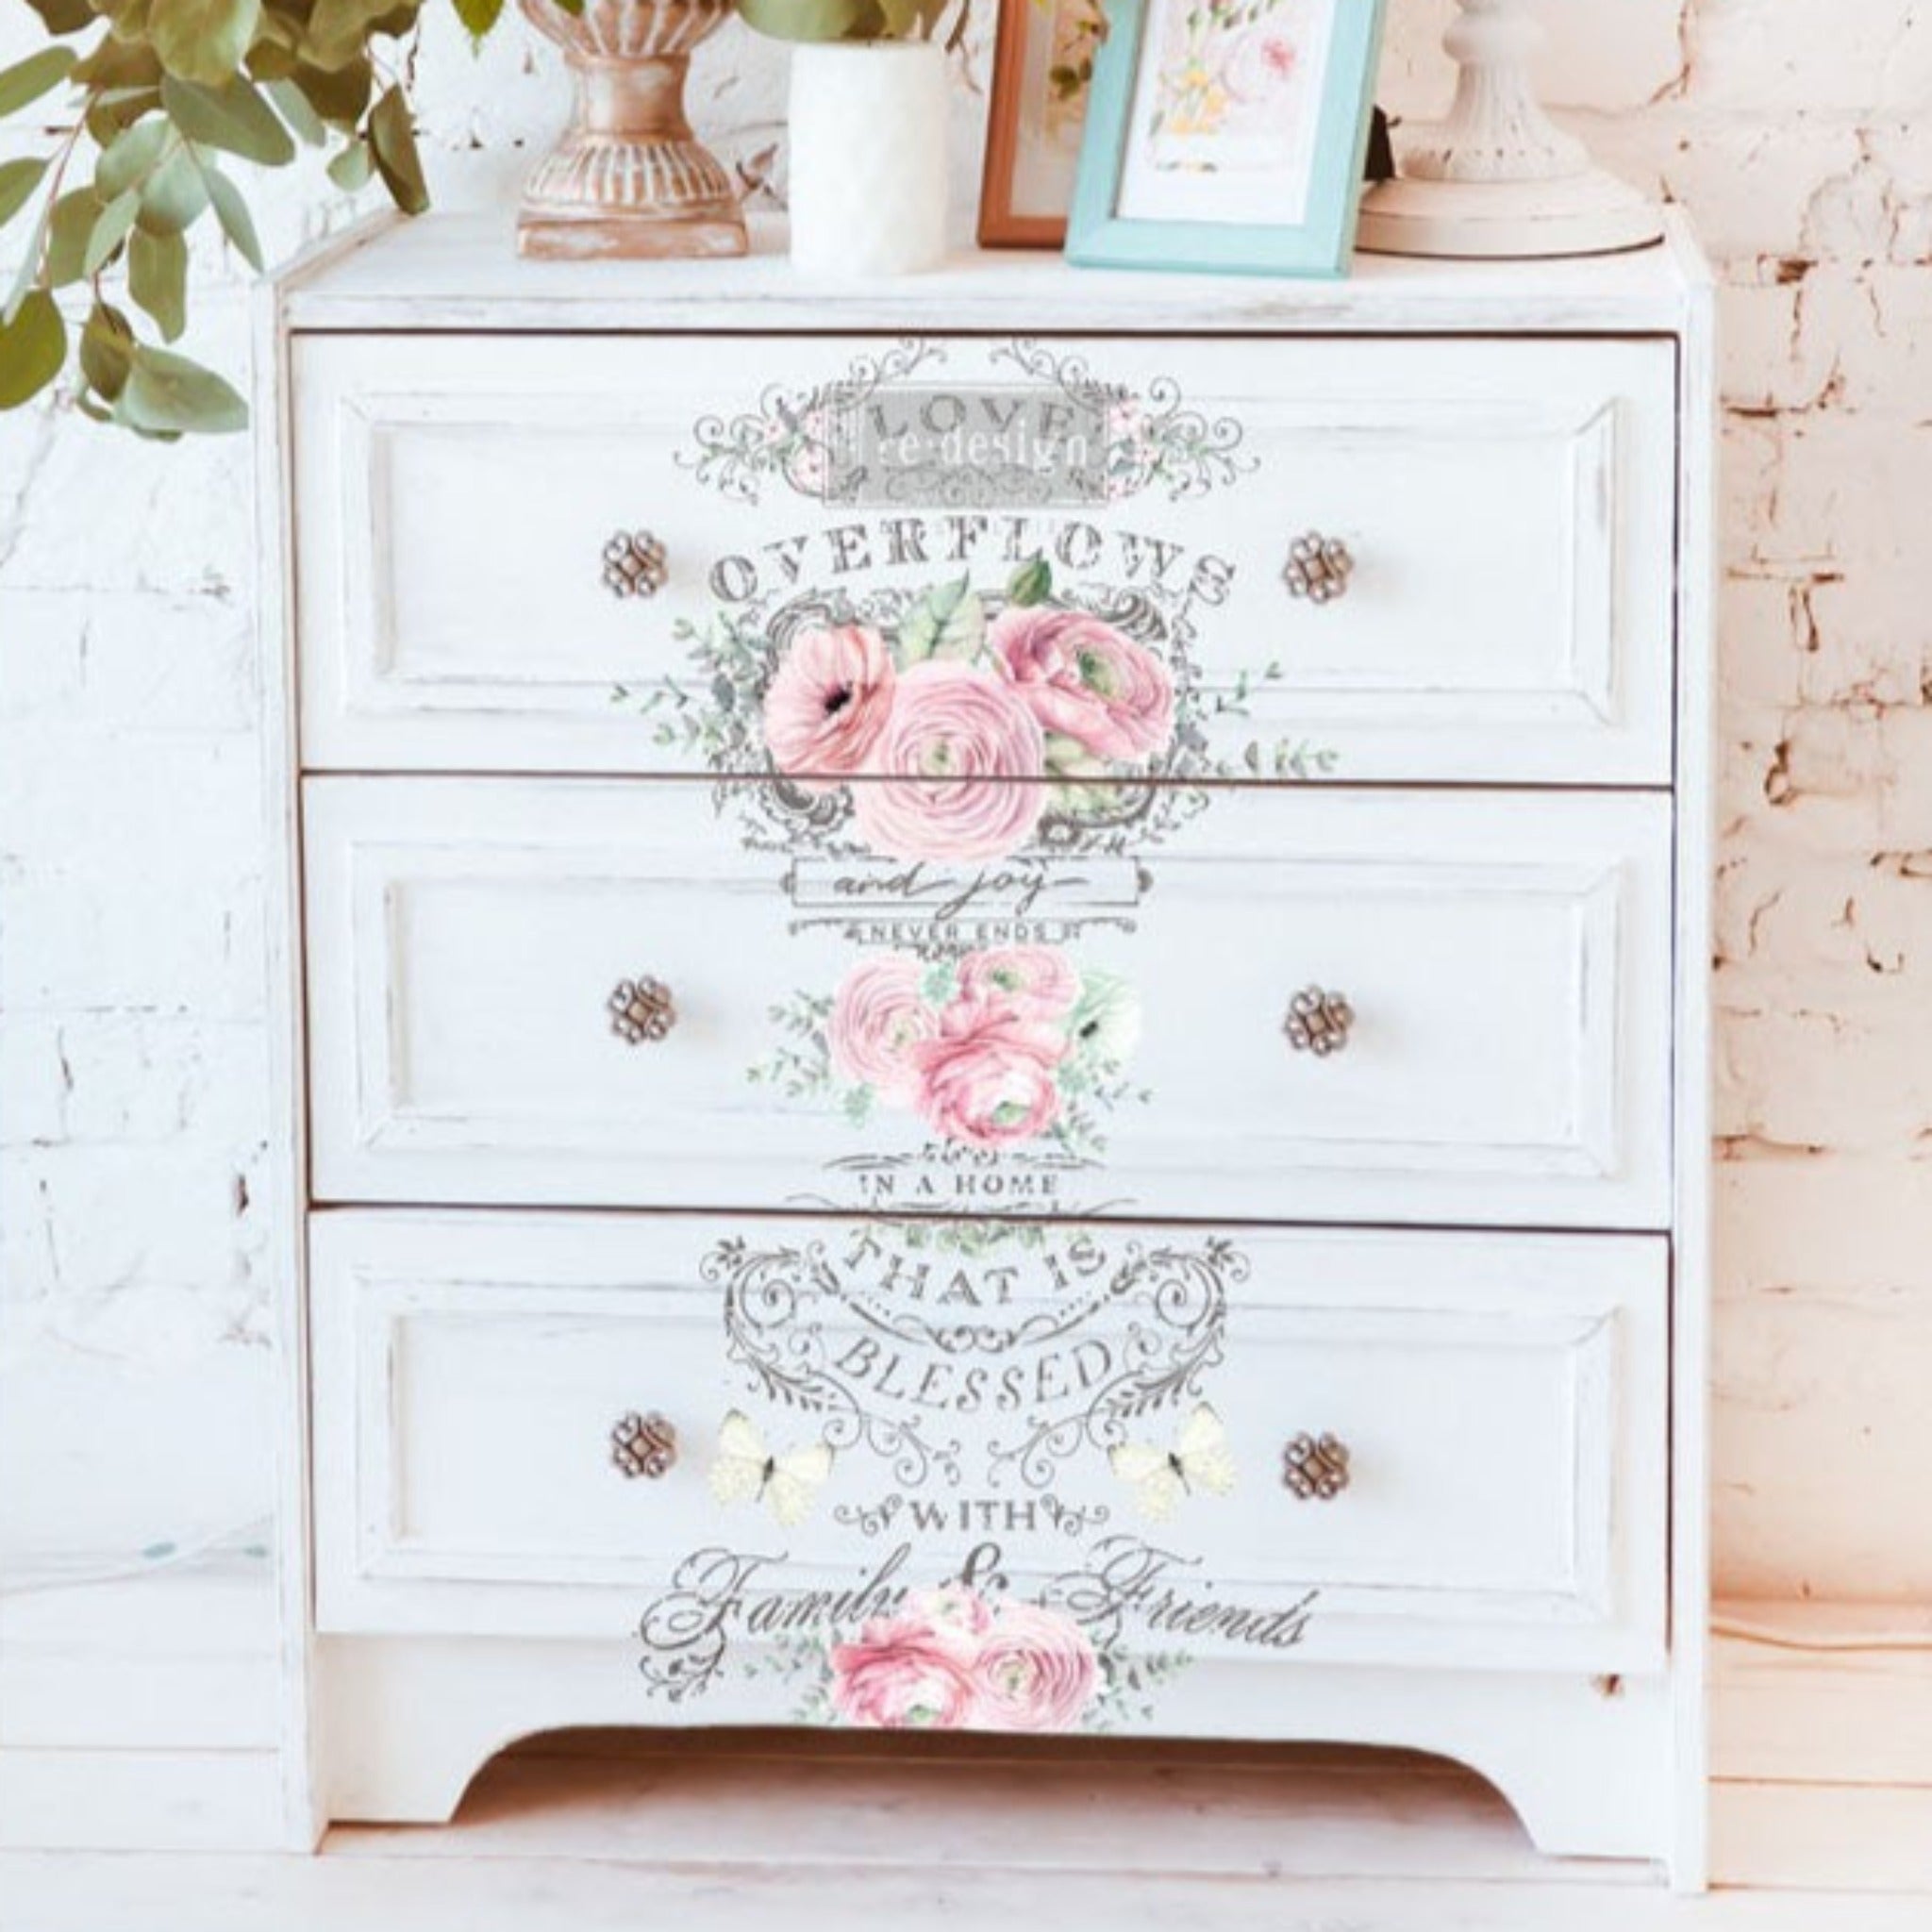 A white 3-drawer nightstand features ReDesign with Prima's Overflowing Love transfer down the center of the drawers.